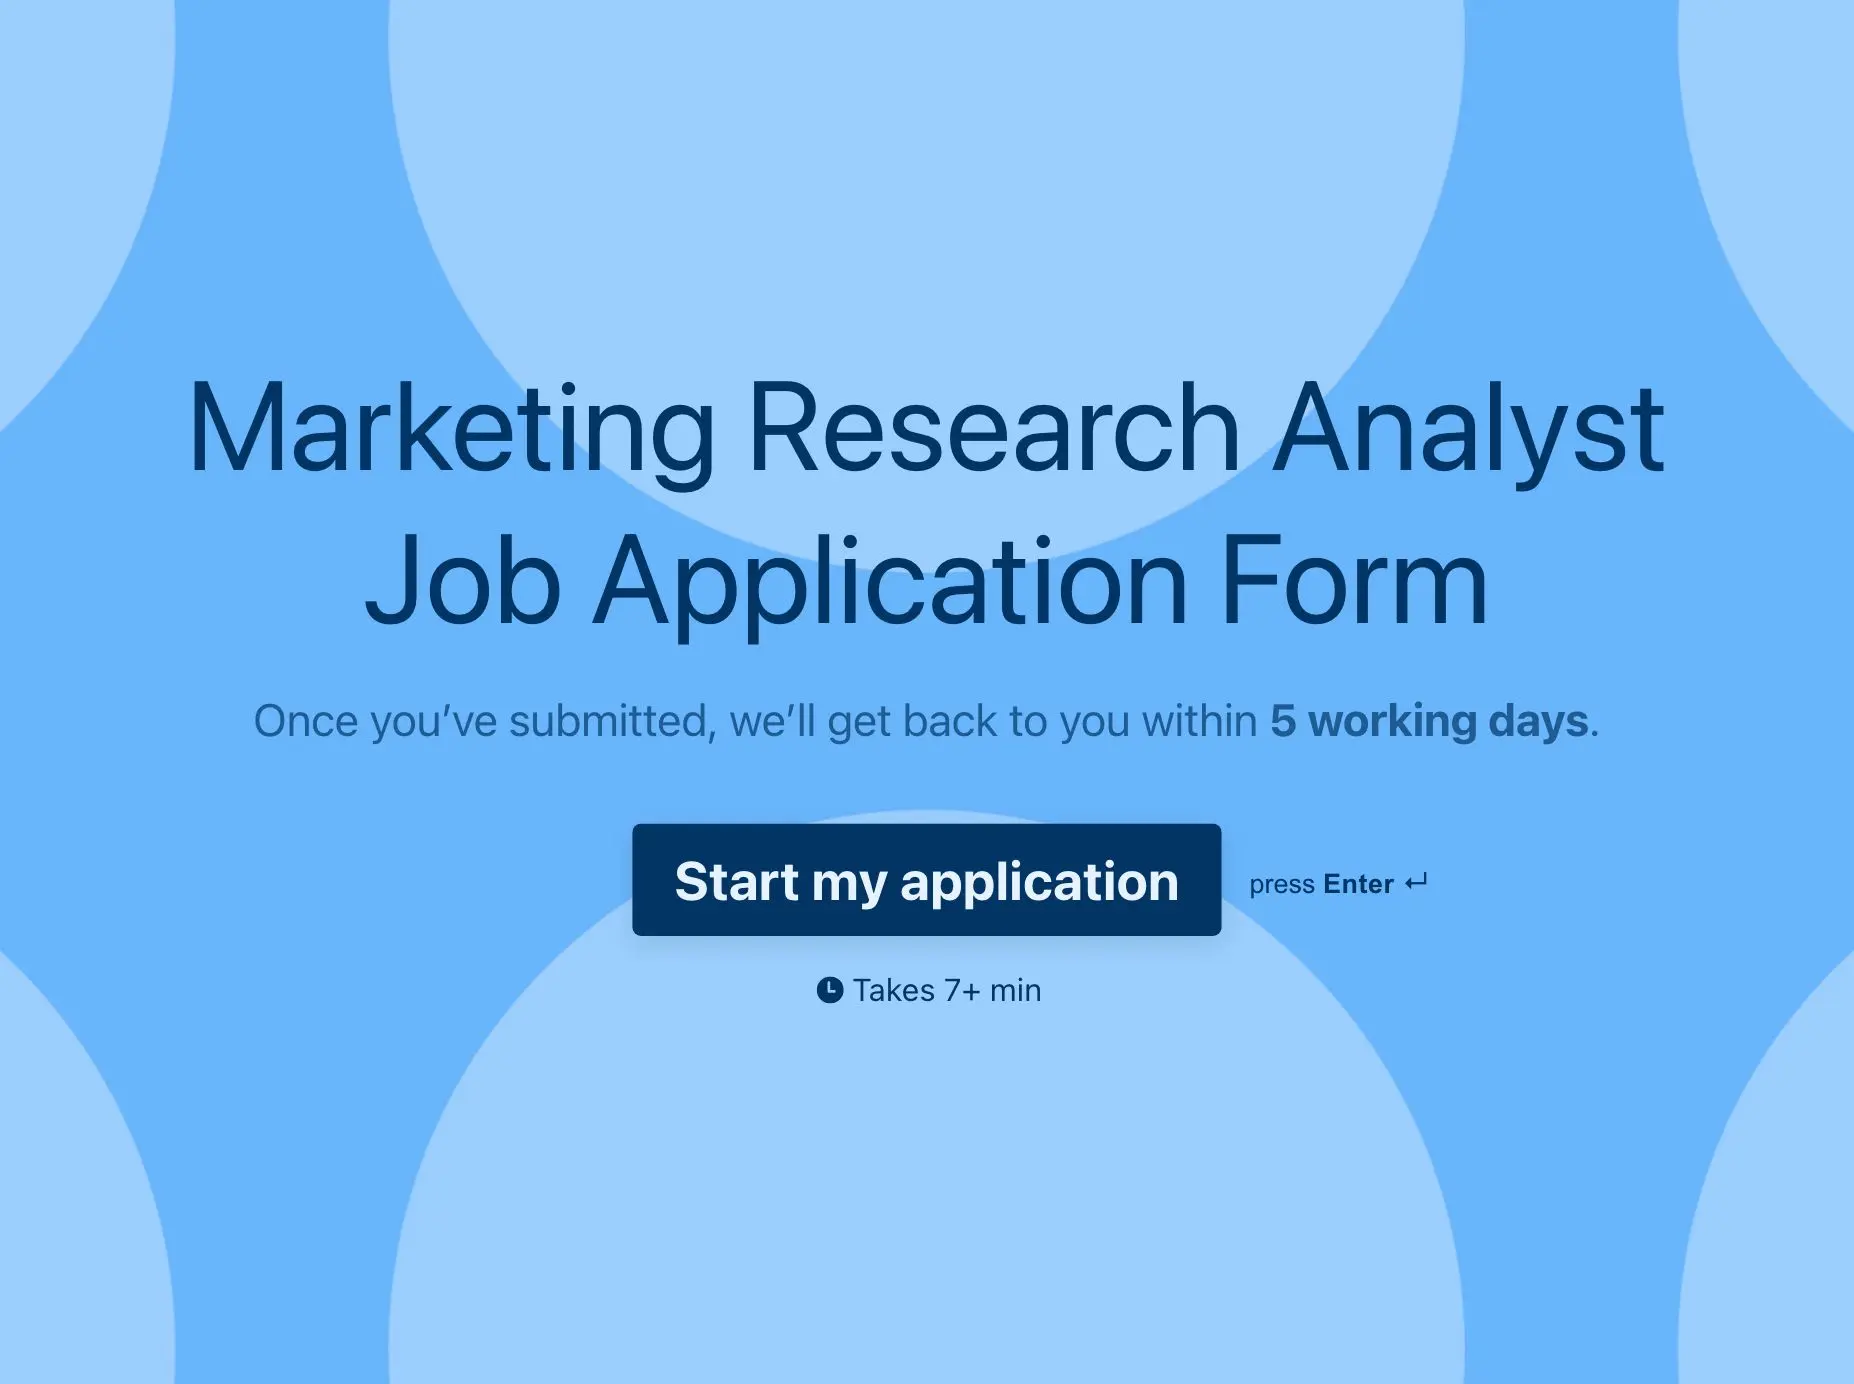 Marketing Research Analyst Job Application Form Template Hero